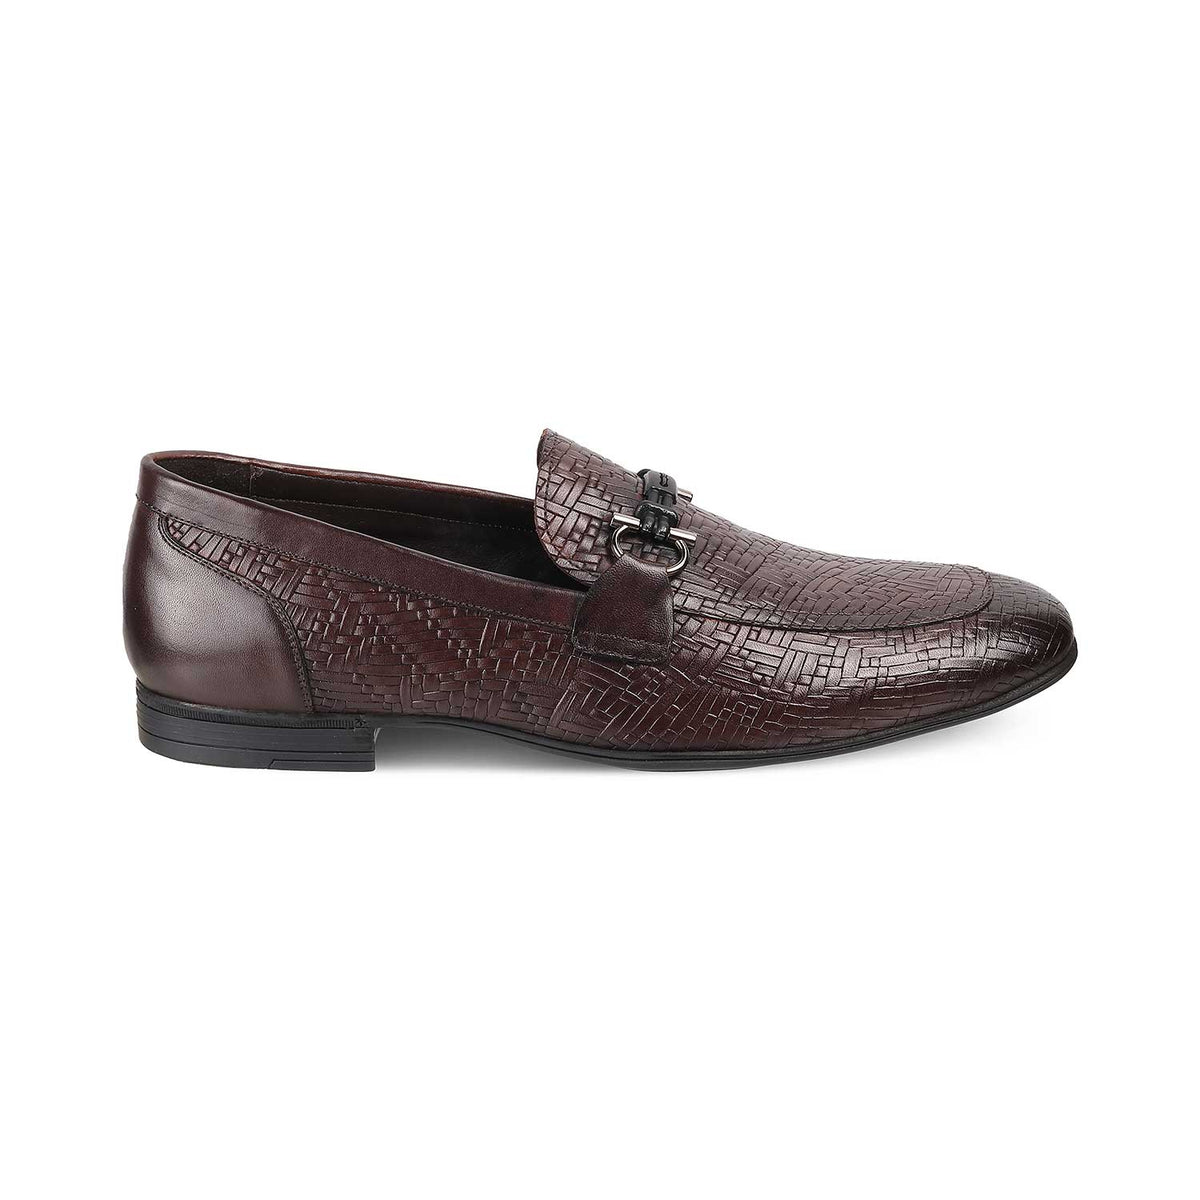 The Crint Tan Men's Leather Loafers - Tresmode